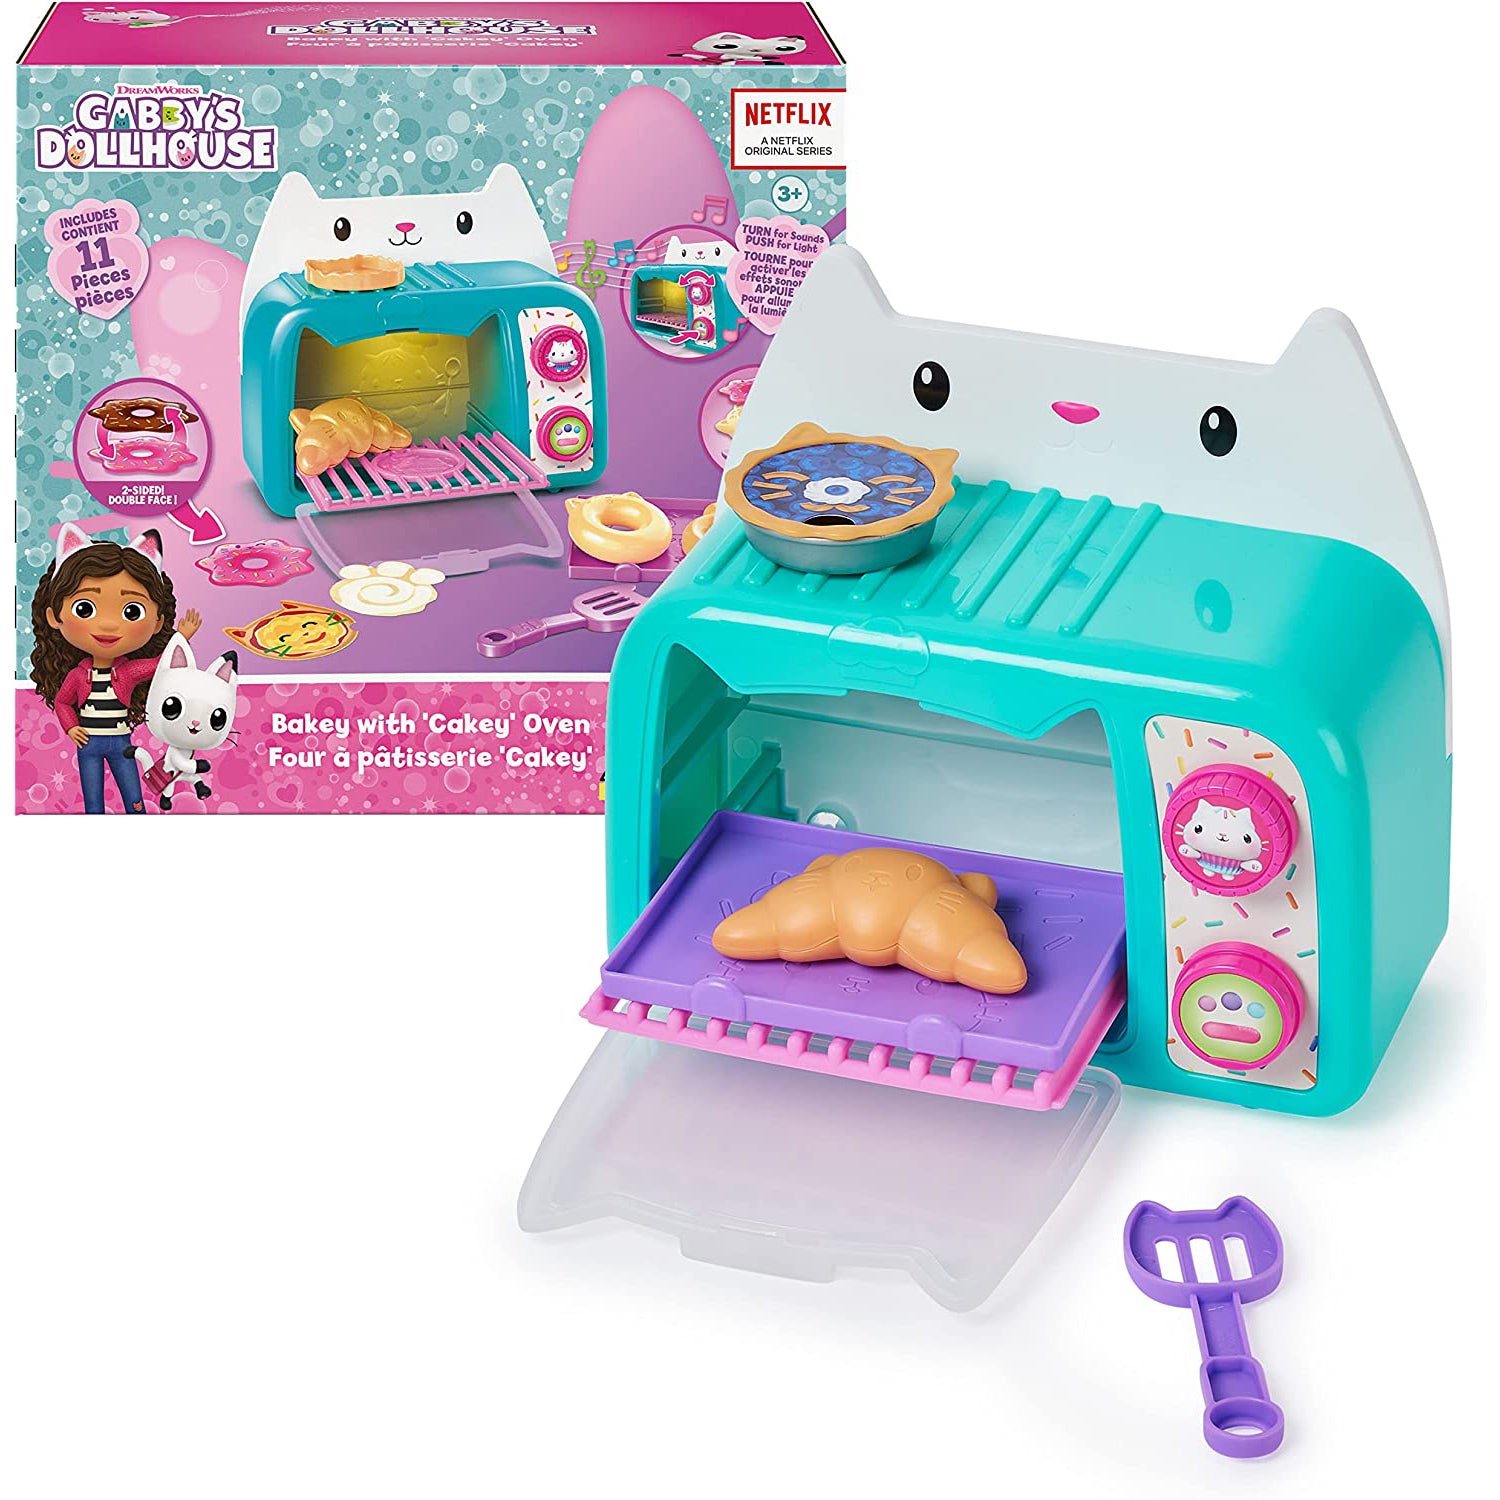 Gabby's Dollhouse Bakey with Cakey Oven Play Kitchen Toy